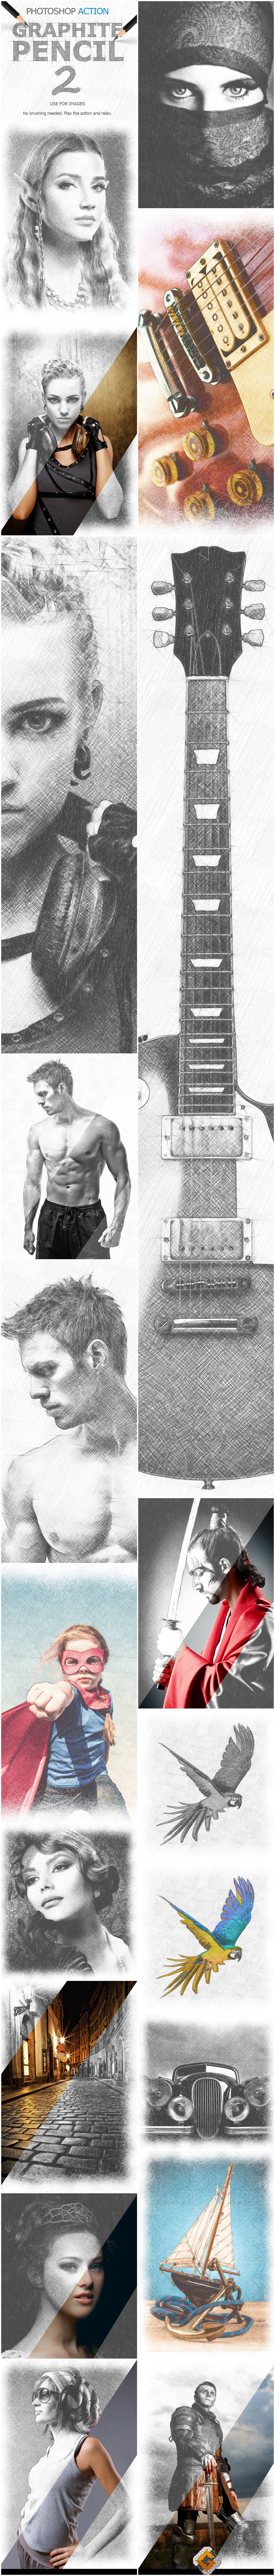 Graphite Pencil 2 Photoshop Actionspreview image.